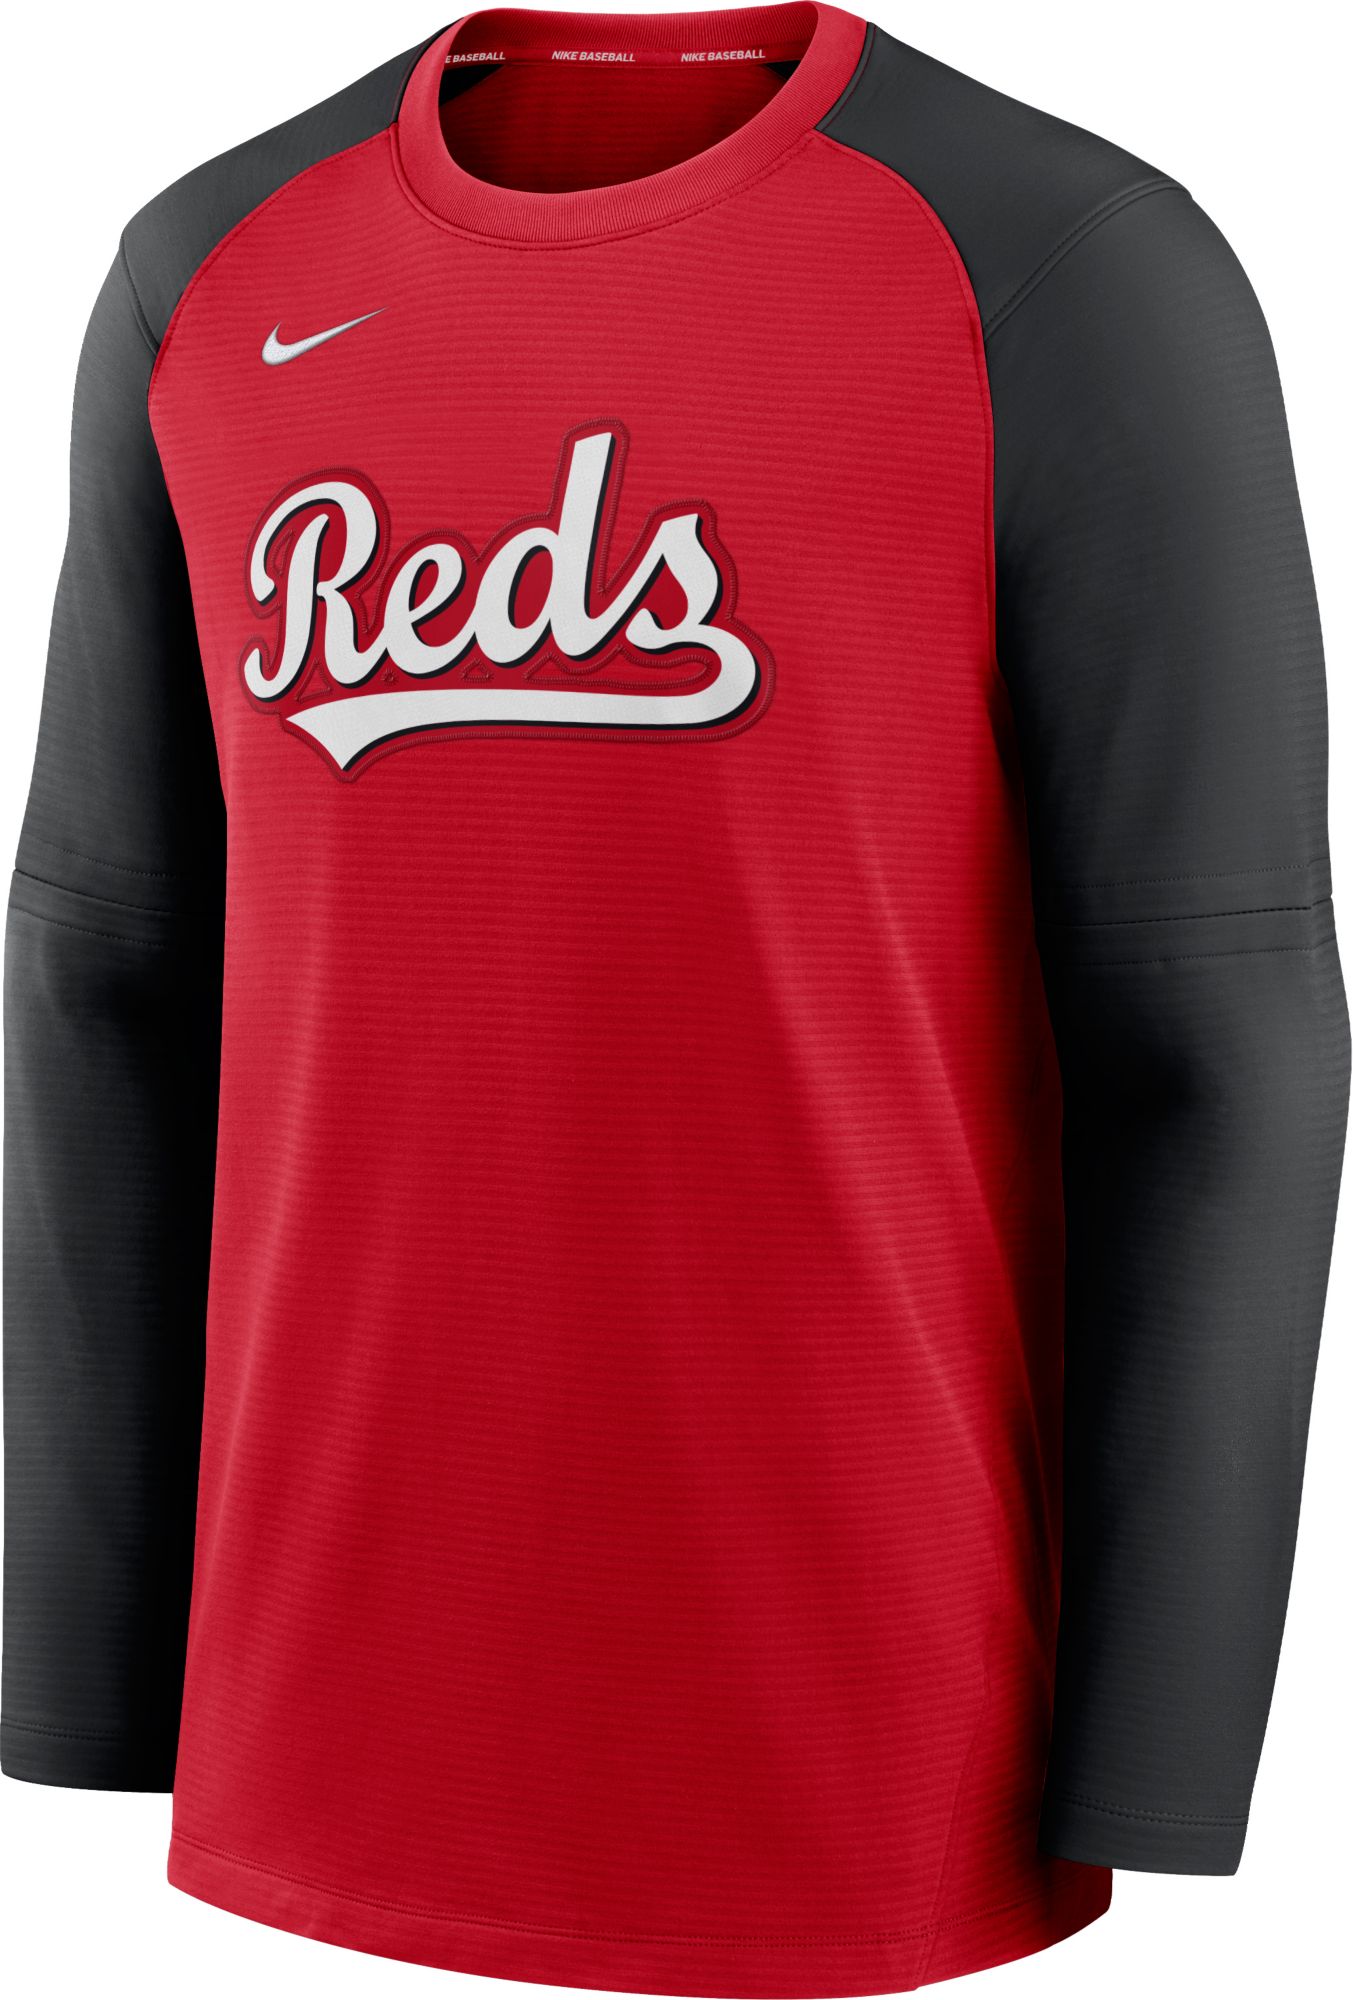 Nike / Men's Cincinnati Reds Red Authentic Collection Pre-Game